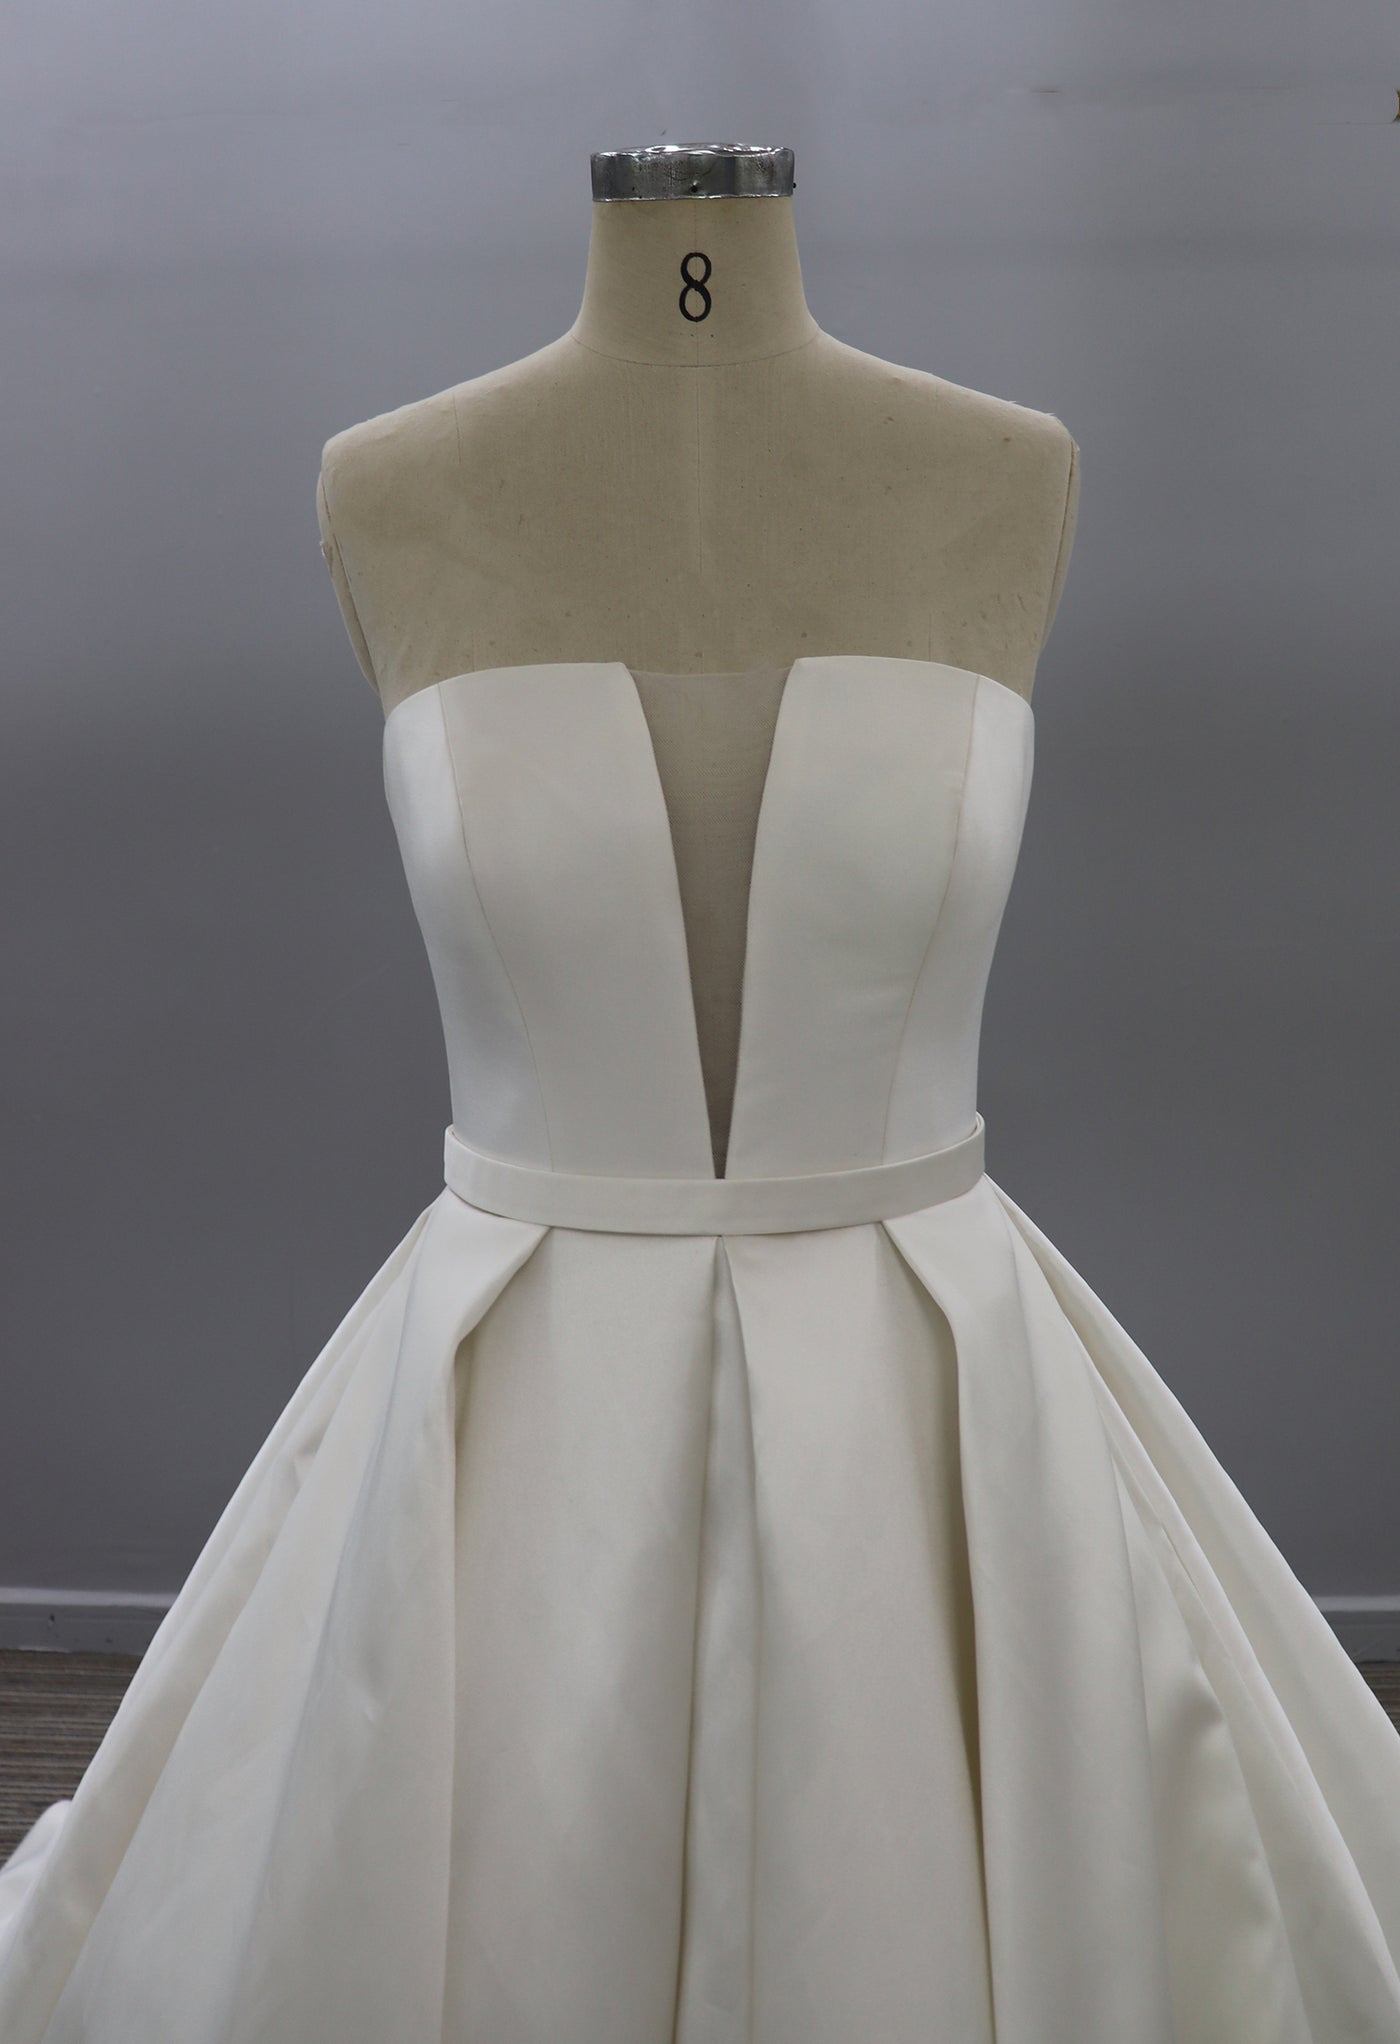 A Modern Strapless Satin Ballgown With Illusion Plunge neckline from Bergamot Bridal on a mannequin at a bridal shop in London.